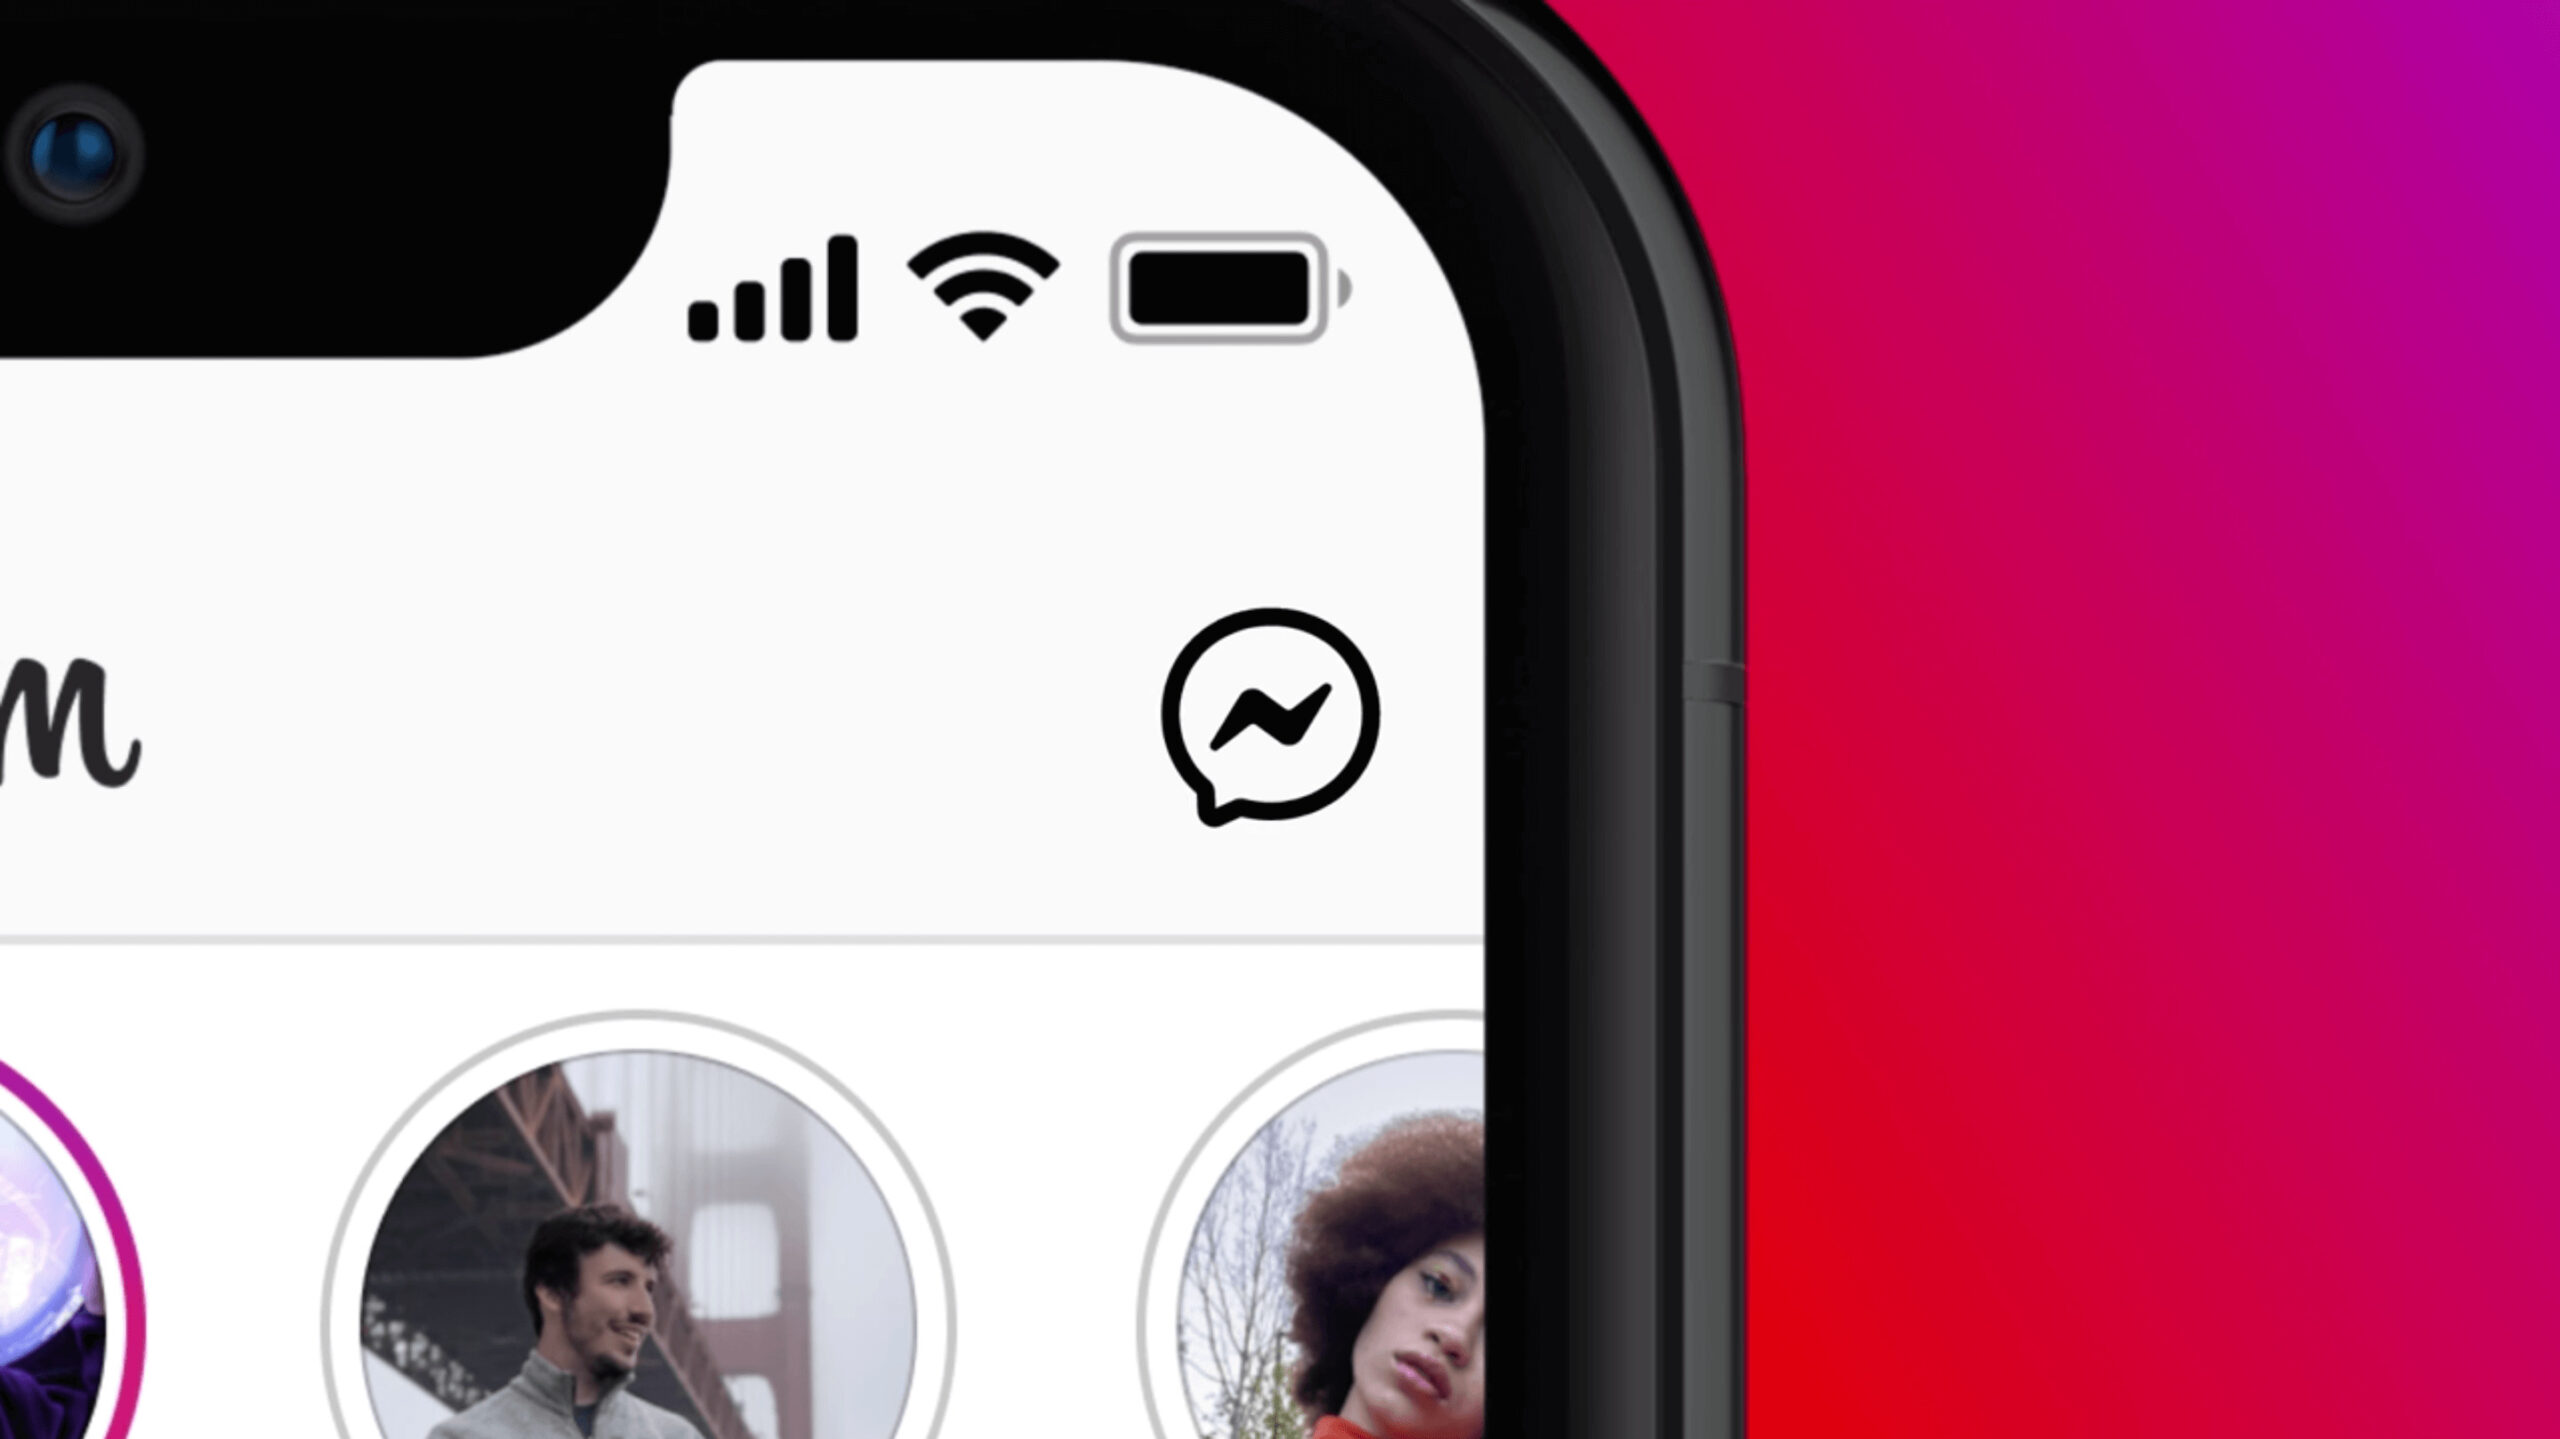 See that Messenger icon at the Instagram box chat?